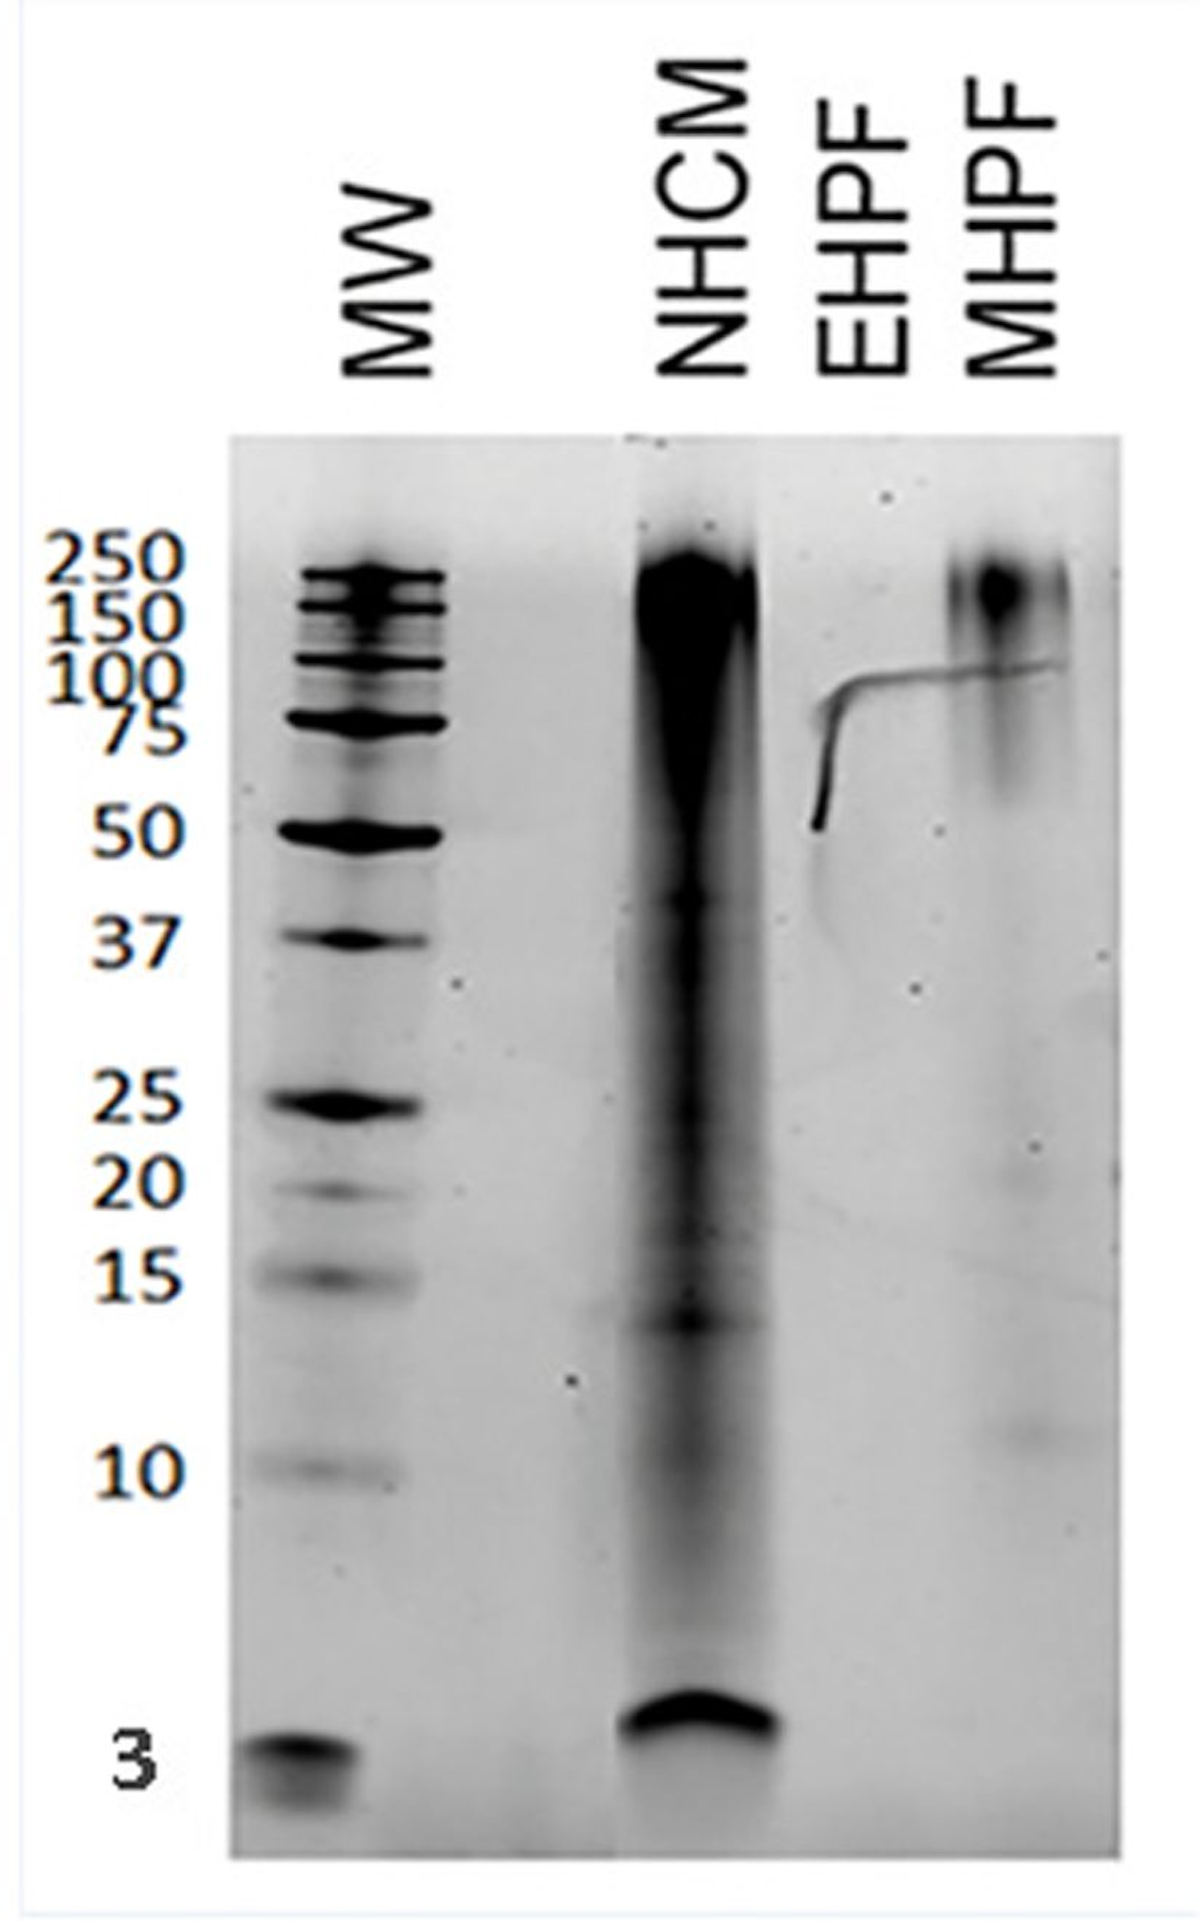 Figure 1. Protein electrophoresis on three different poultry-based raw materials, including the extensively hydrolyzed feather protein of Anallergenic diets.  Key:   • NHCM (non-hydrolyzed chicken meal): many proteins of varying molecular weight can be seen • EHPF (Anallergenic extensively hydrolyzed poultry feather): no band seen • MHPF (mildly hydrolyzed poultry feather): residual large proteins are seen • MW: molecular weight in kilodaltons (kDa)  Note: Free amino acids are not visualized by this technique. The artefact on the gel was a deposit before migration.